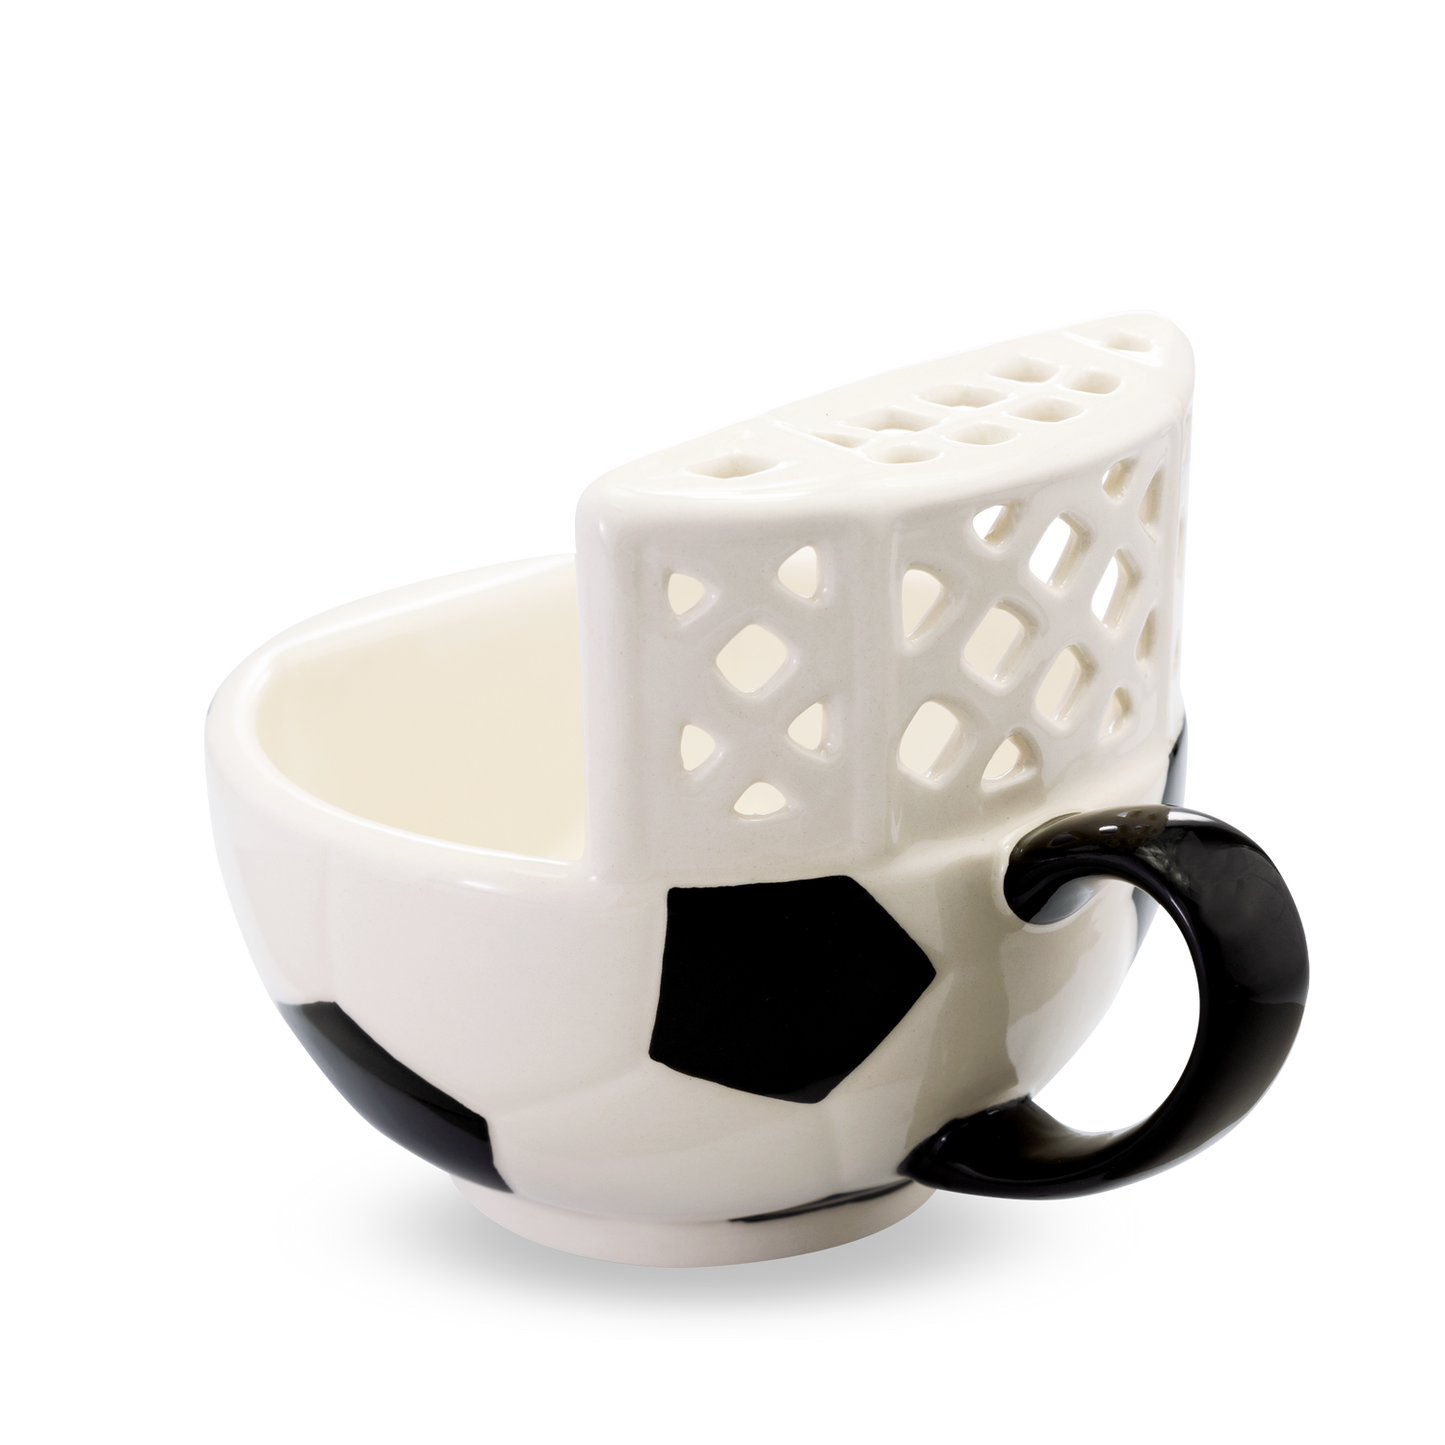 The soccer mug with a goal! START YOUR MORNINGS WITH FUN! Play with your food with this original soccer mug with an attached goal. Perfect for scoring mini marshmallows into cocoa, cereal into milk, crackers into soup, or toppings onto ice cream! Something to root for in your morning routine!